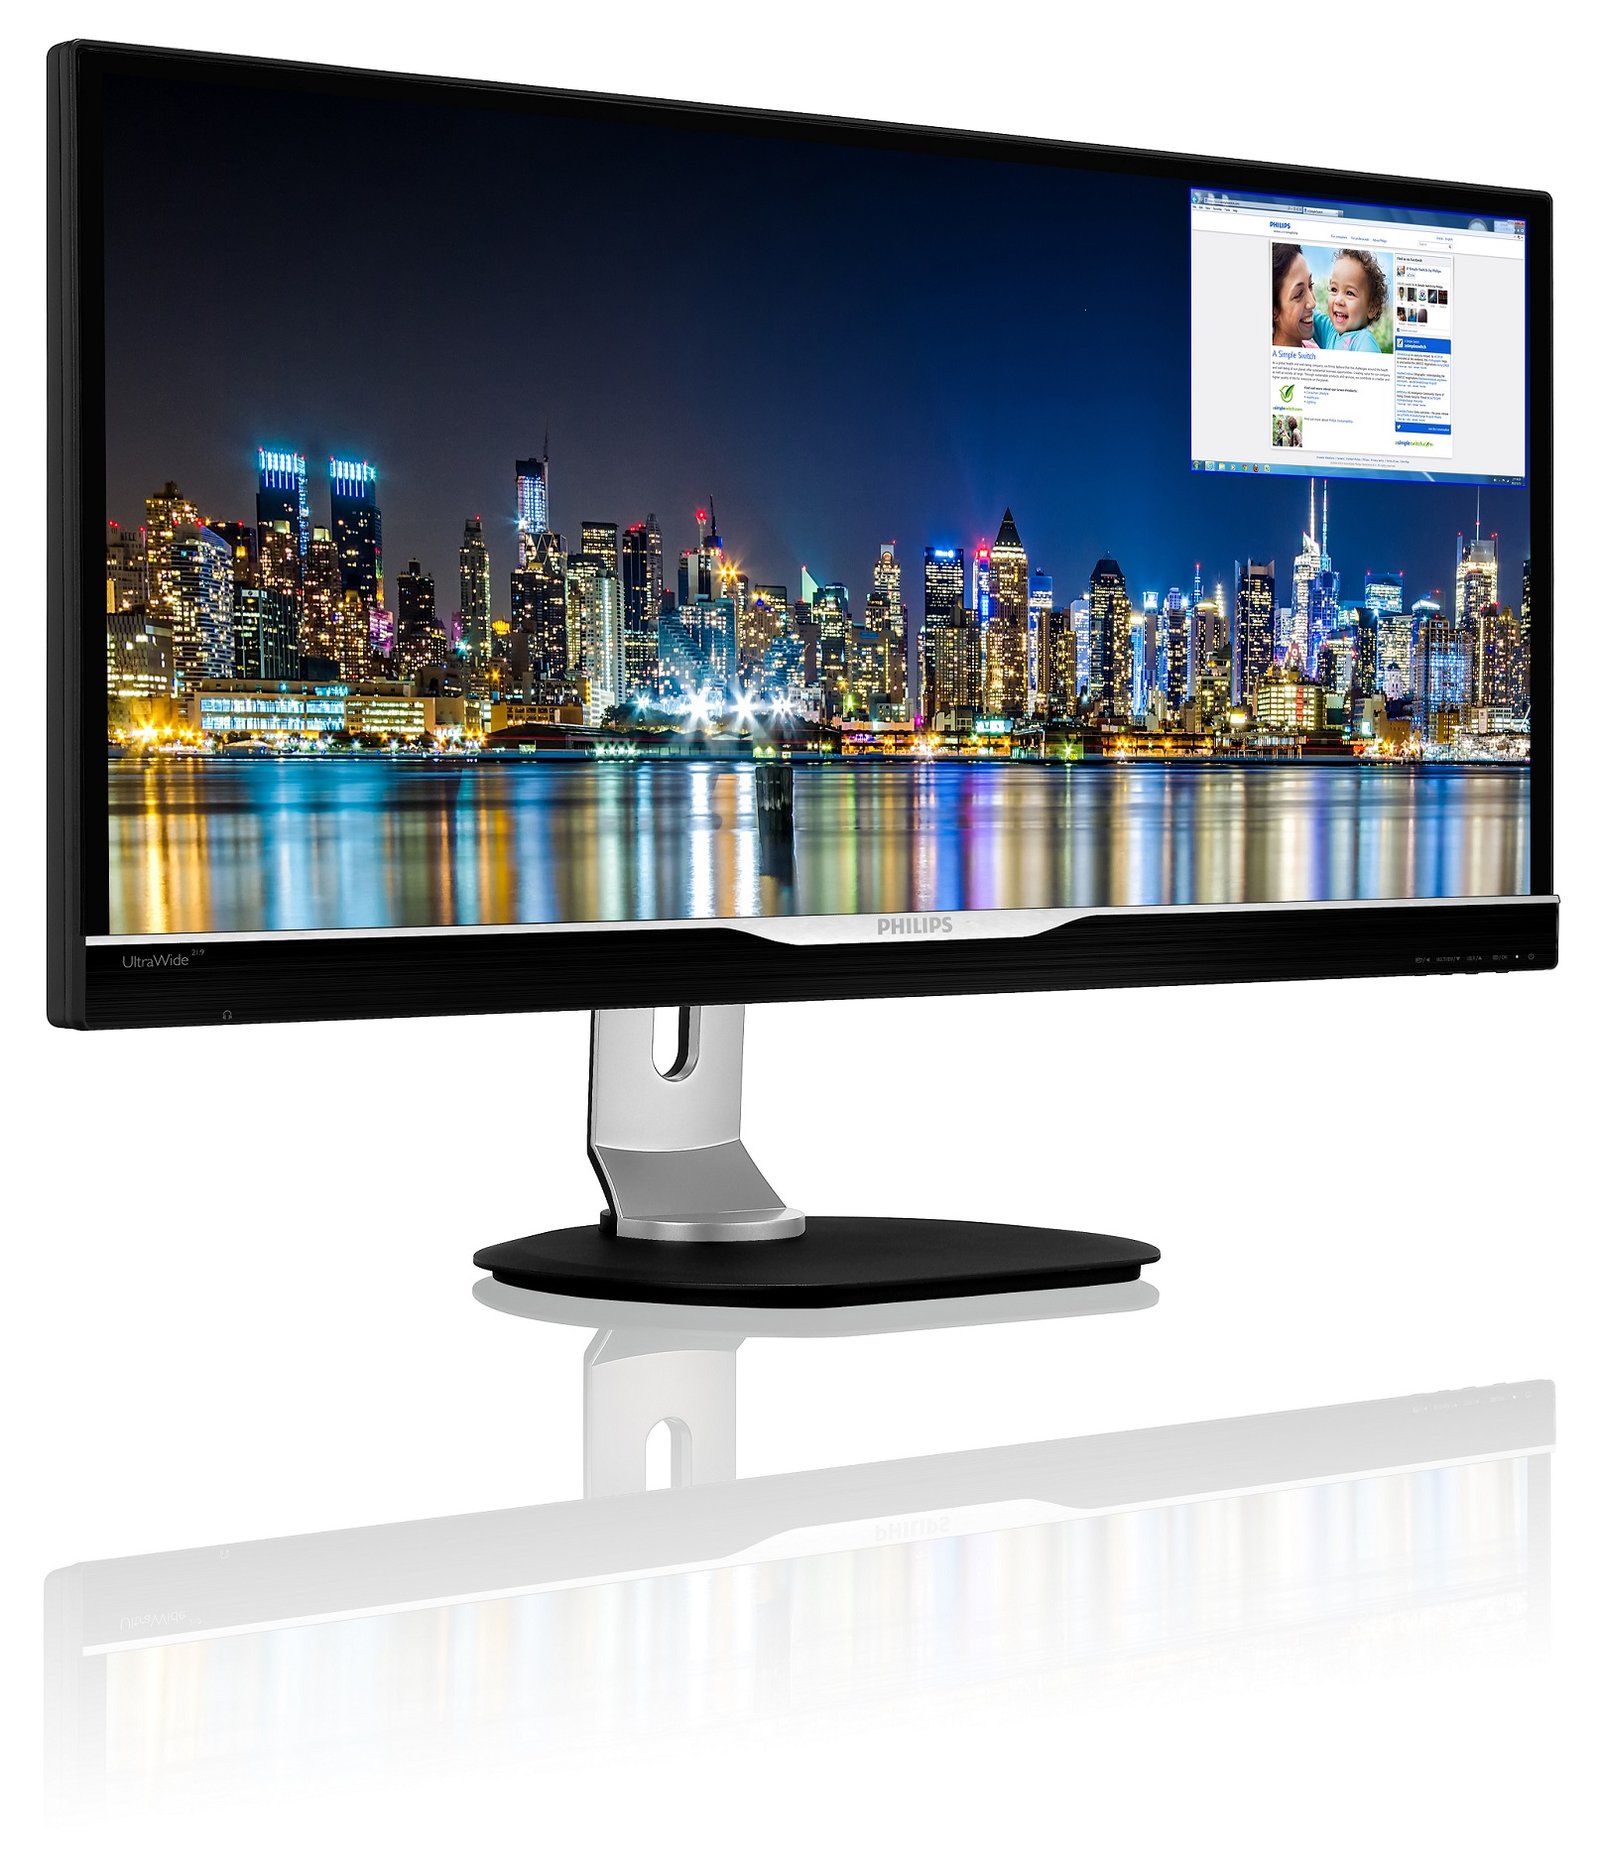 Facilities report Disturb Philips' crystal clear UltraWide 21:9 display now out - Channel Post MEA